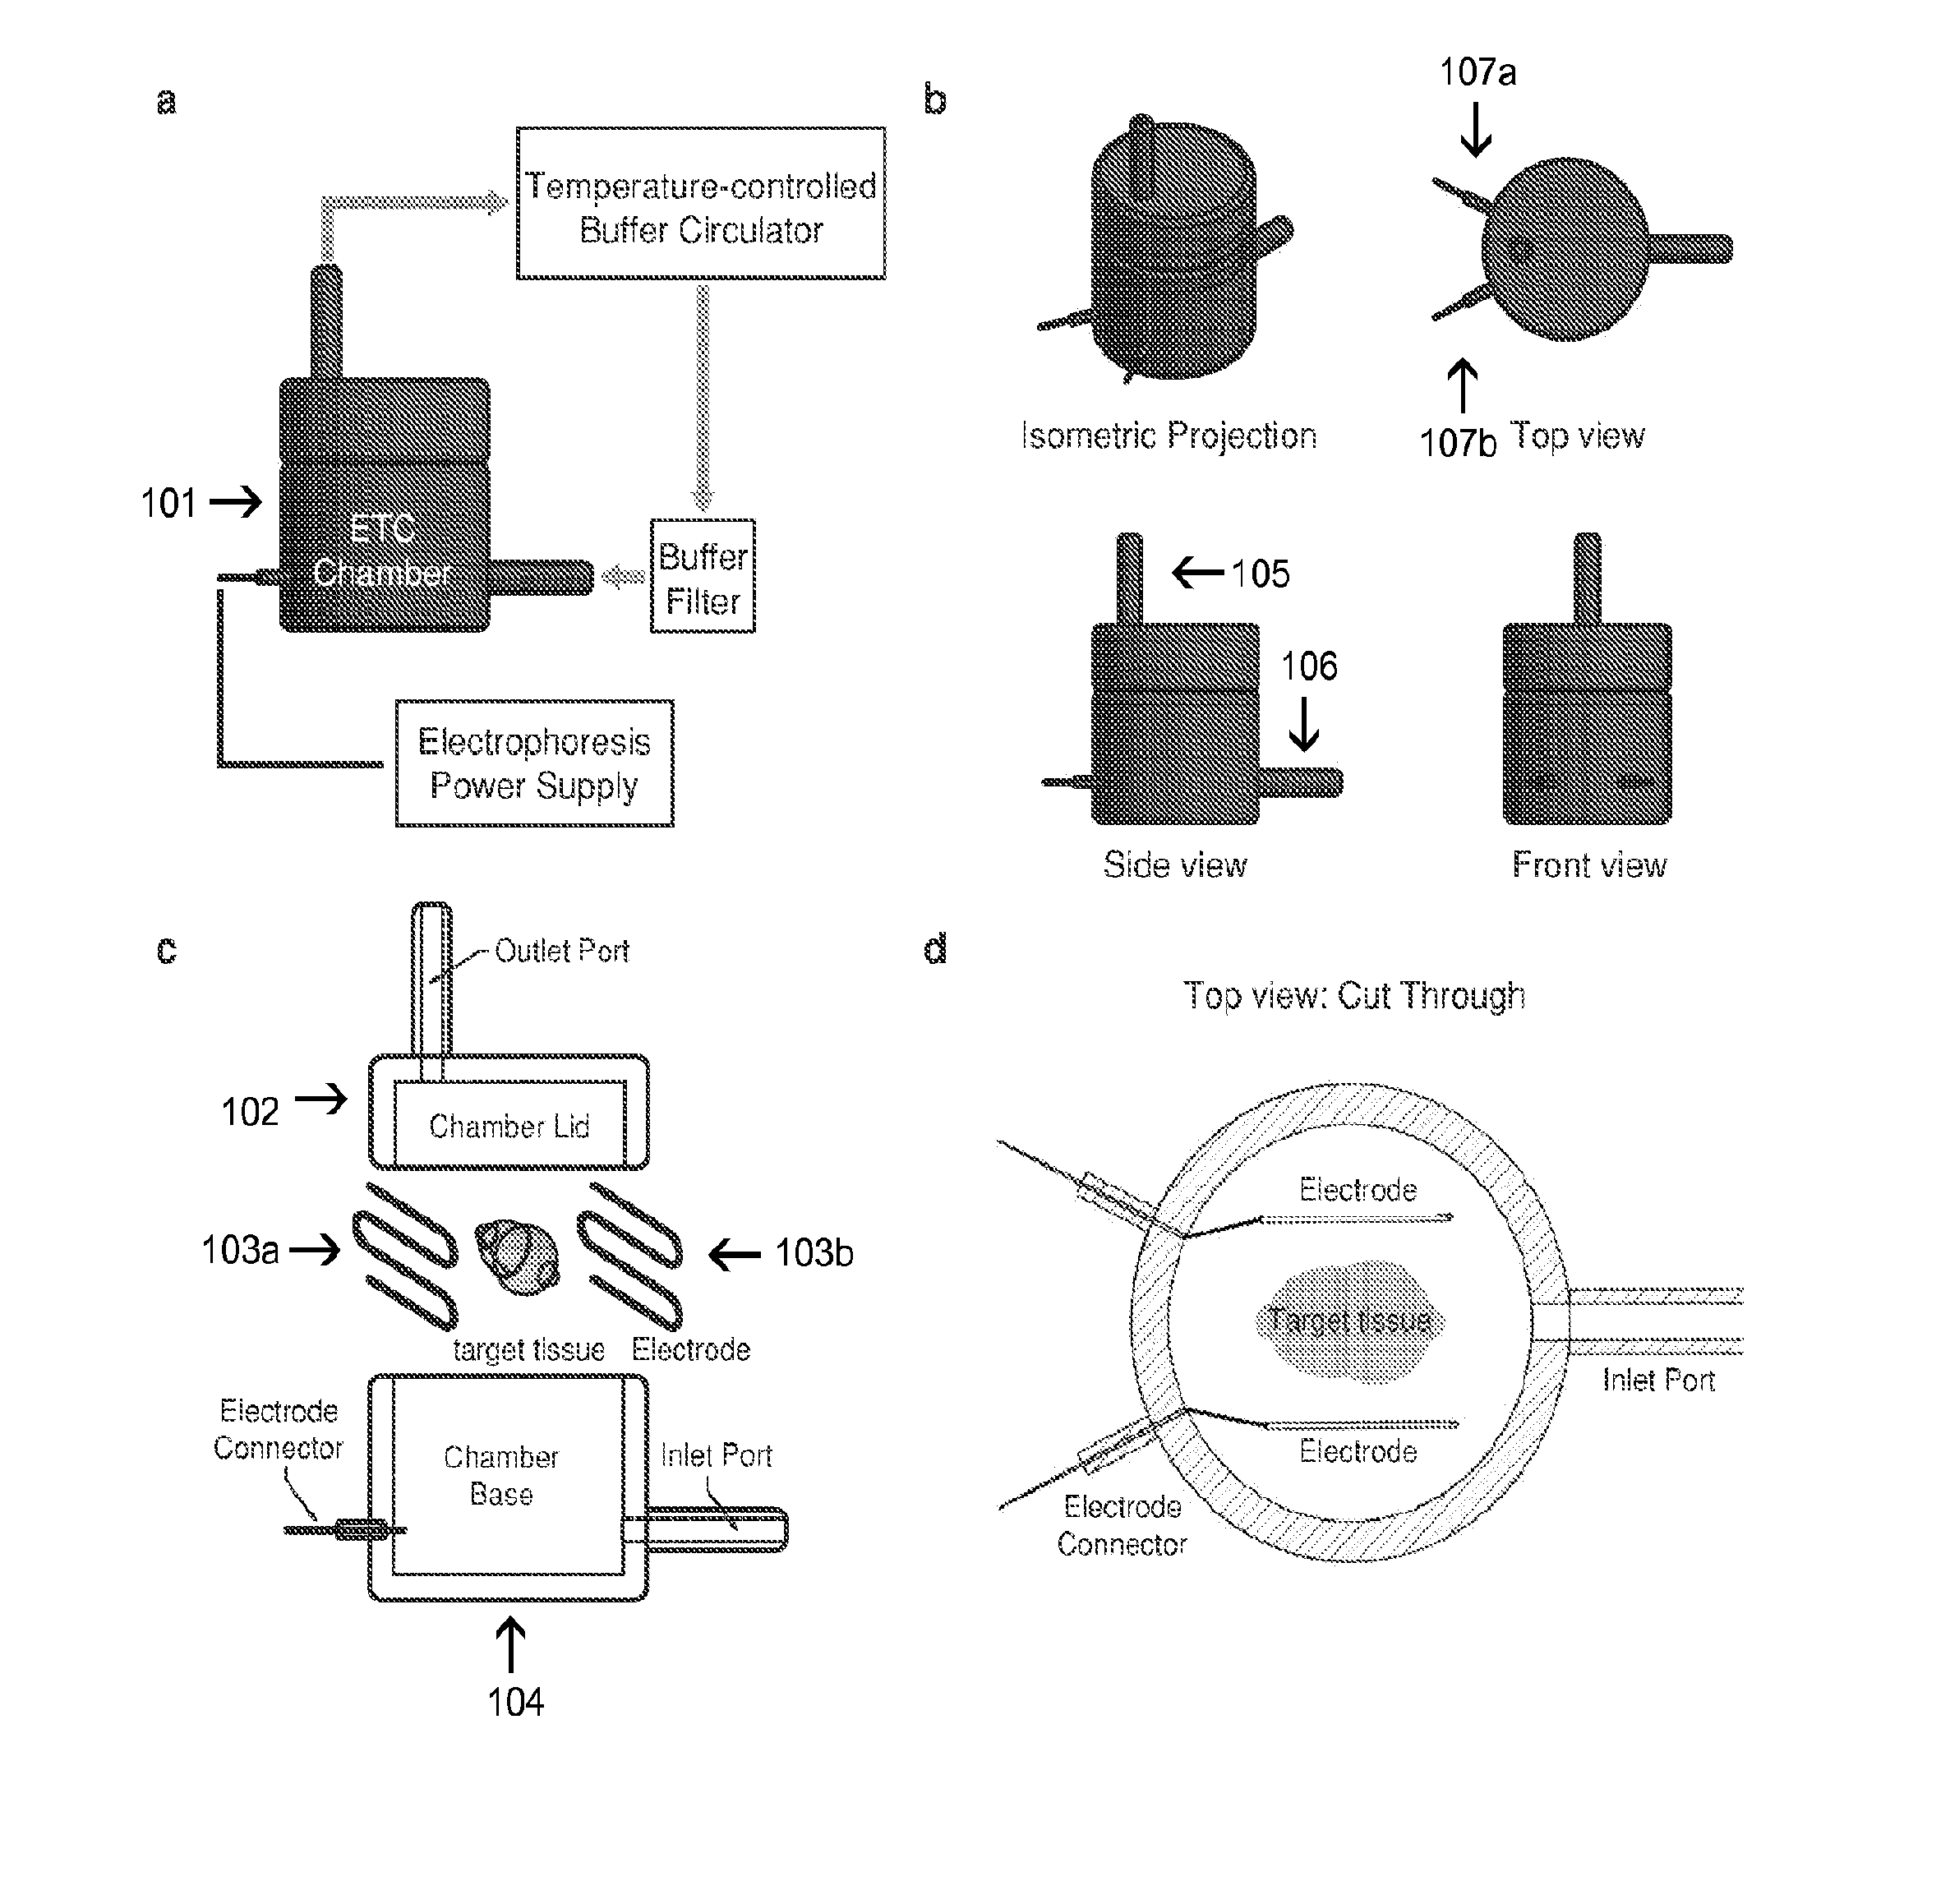 Methods and Compositions for Preparing Biological Specimens for Microscopic Analysis